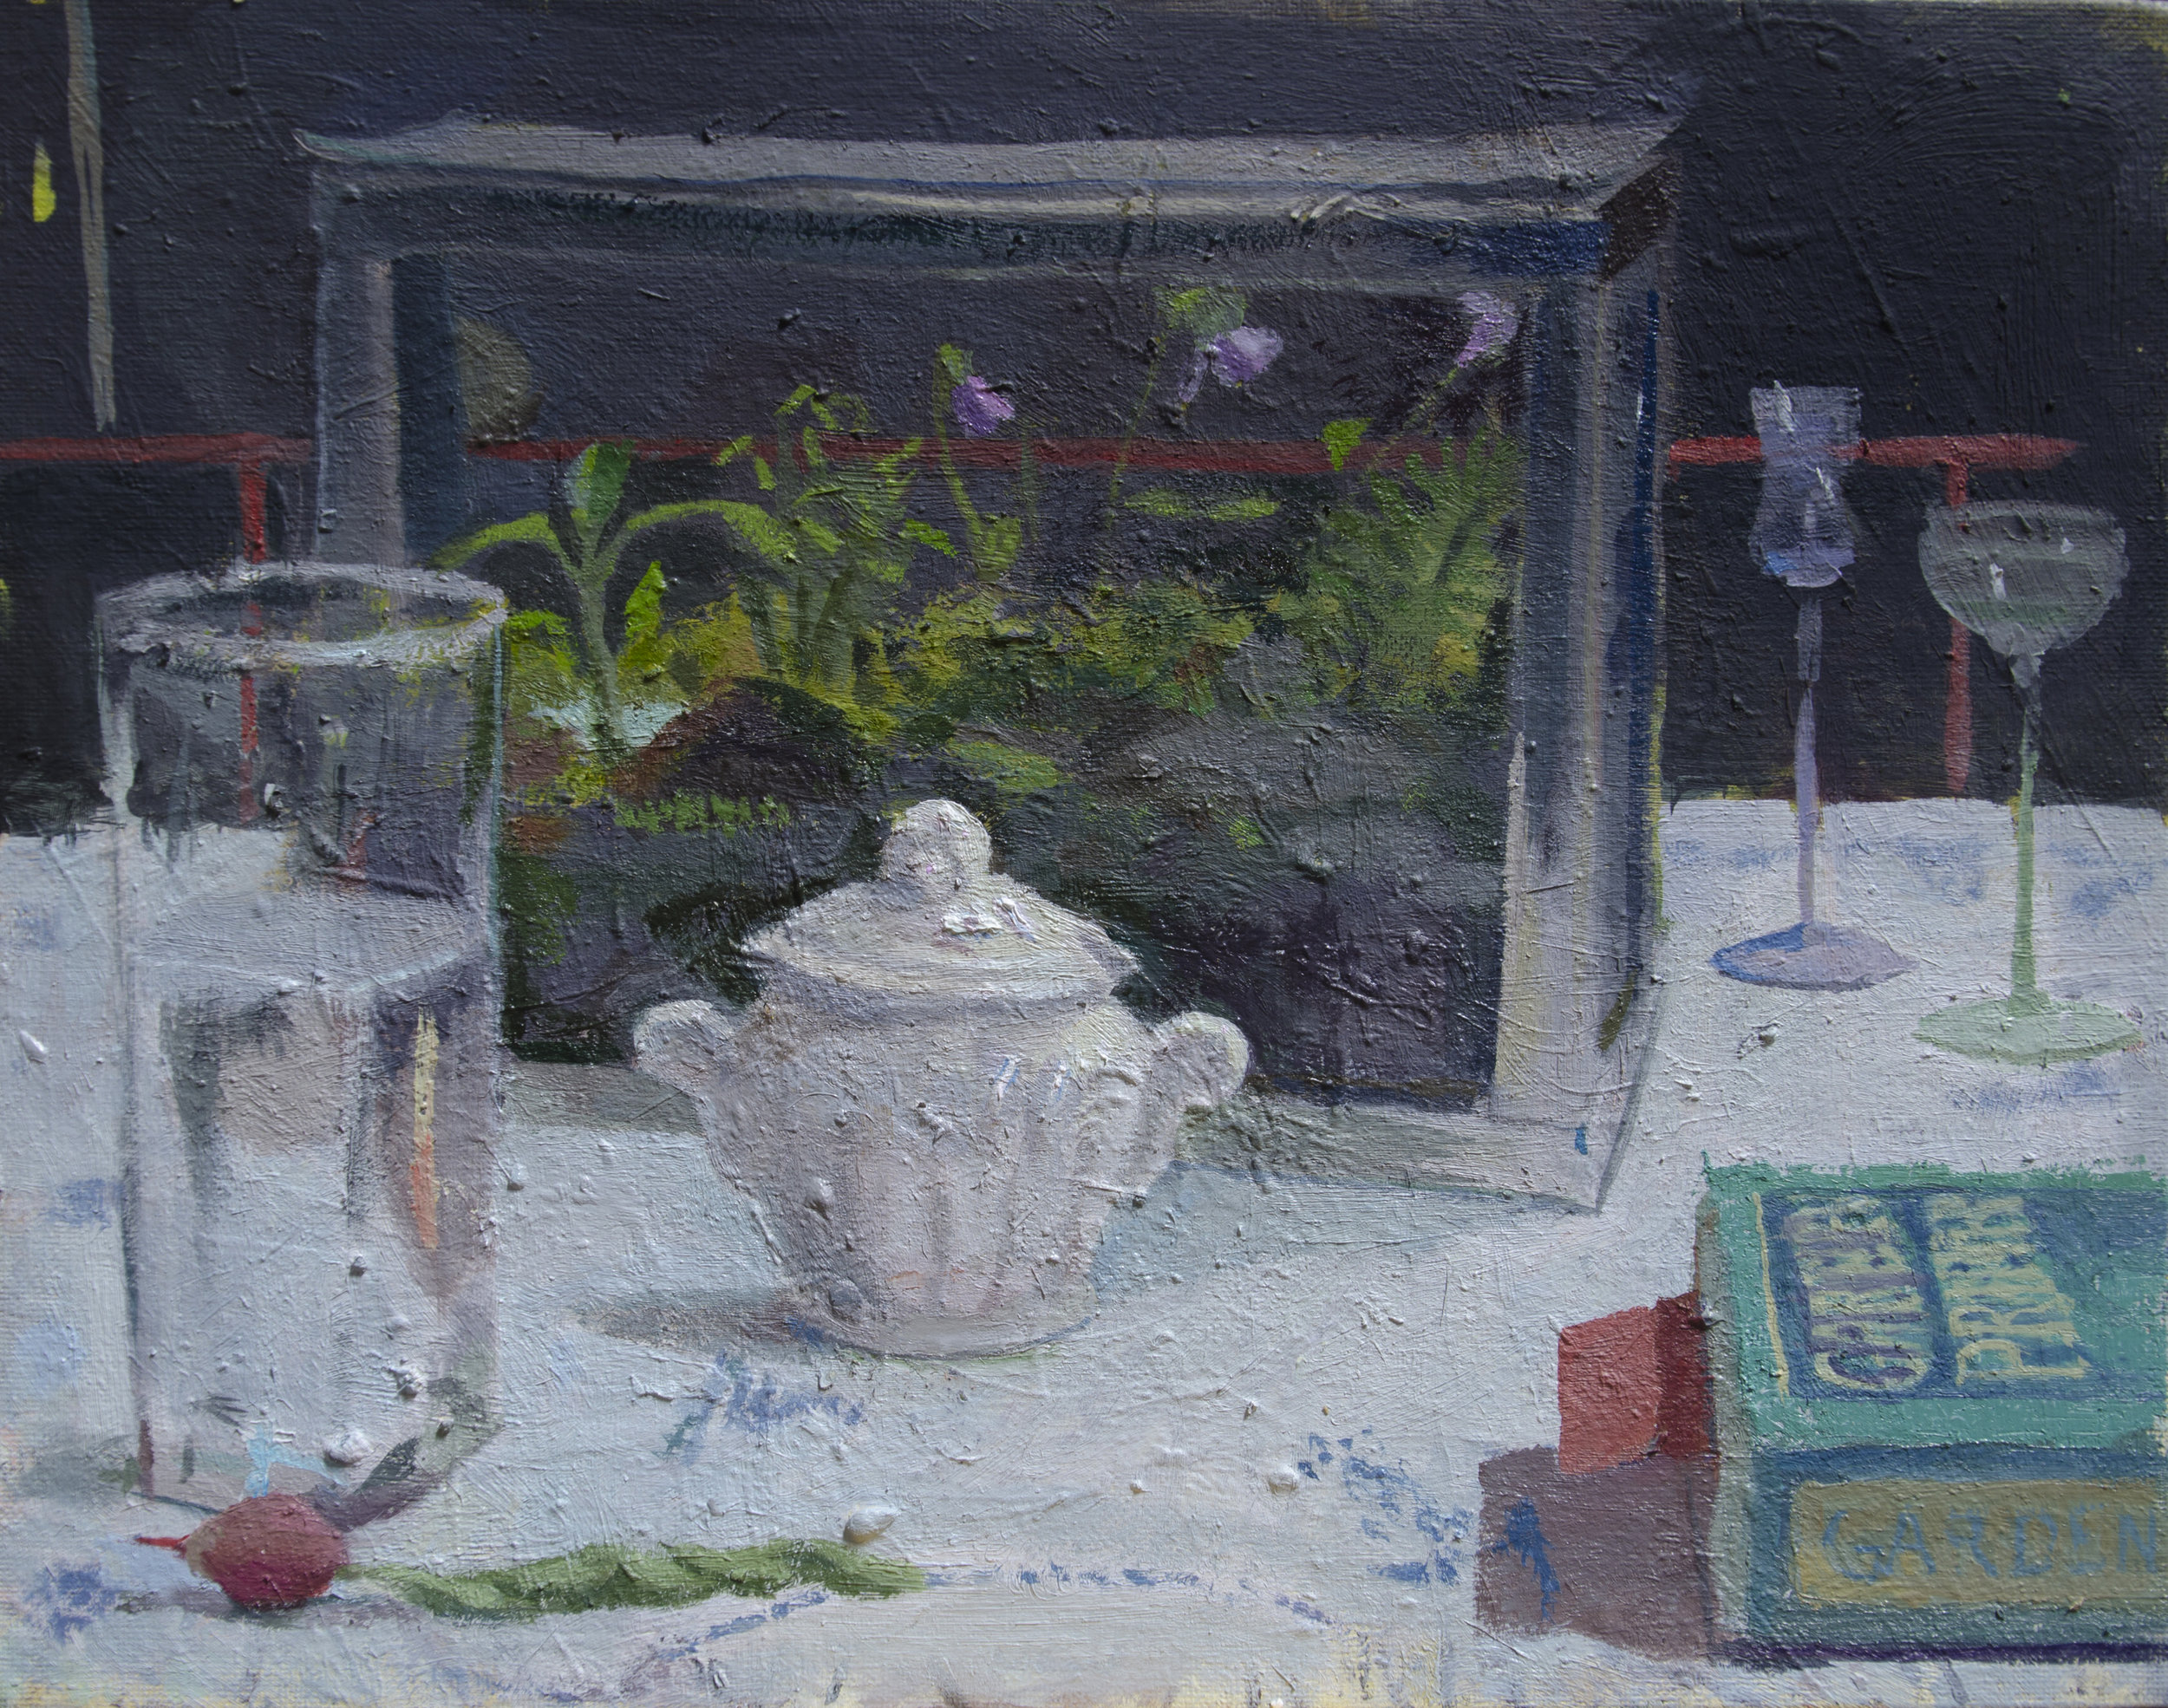 Still Life with Terrarium, 8" x 10", Oil on museum board, 2018 (SOLD)